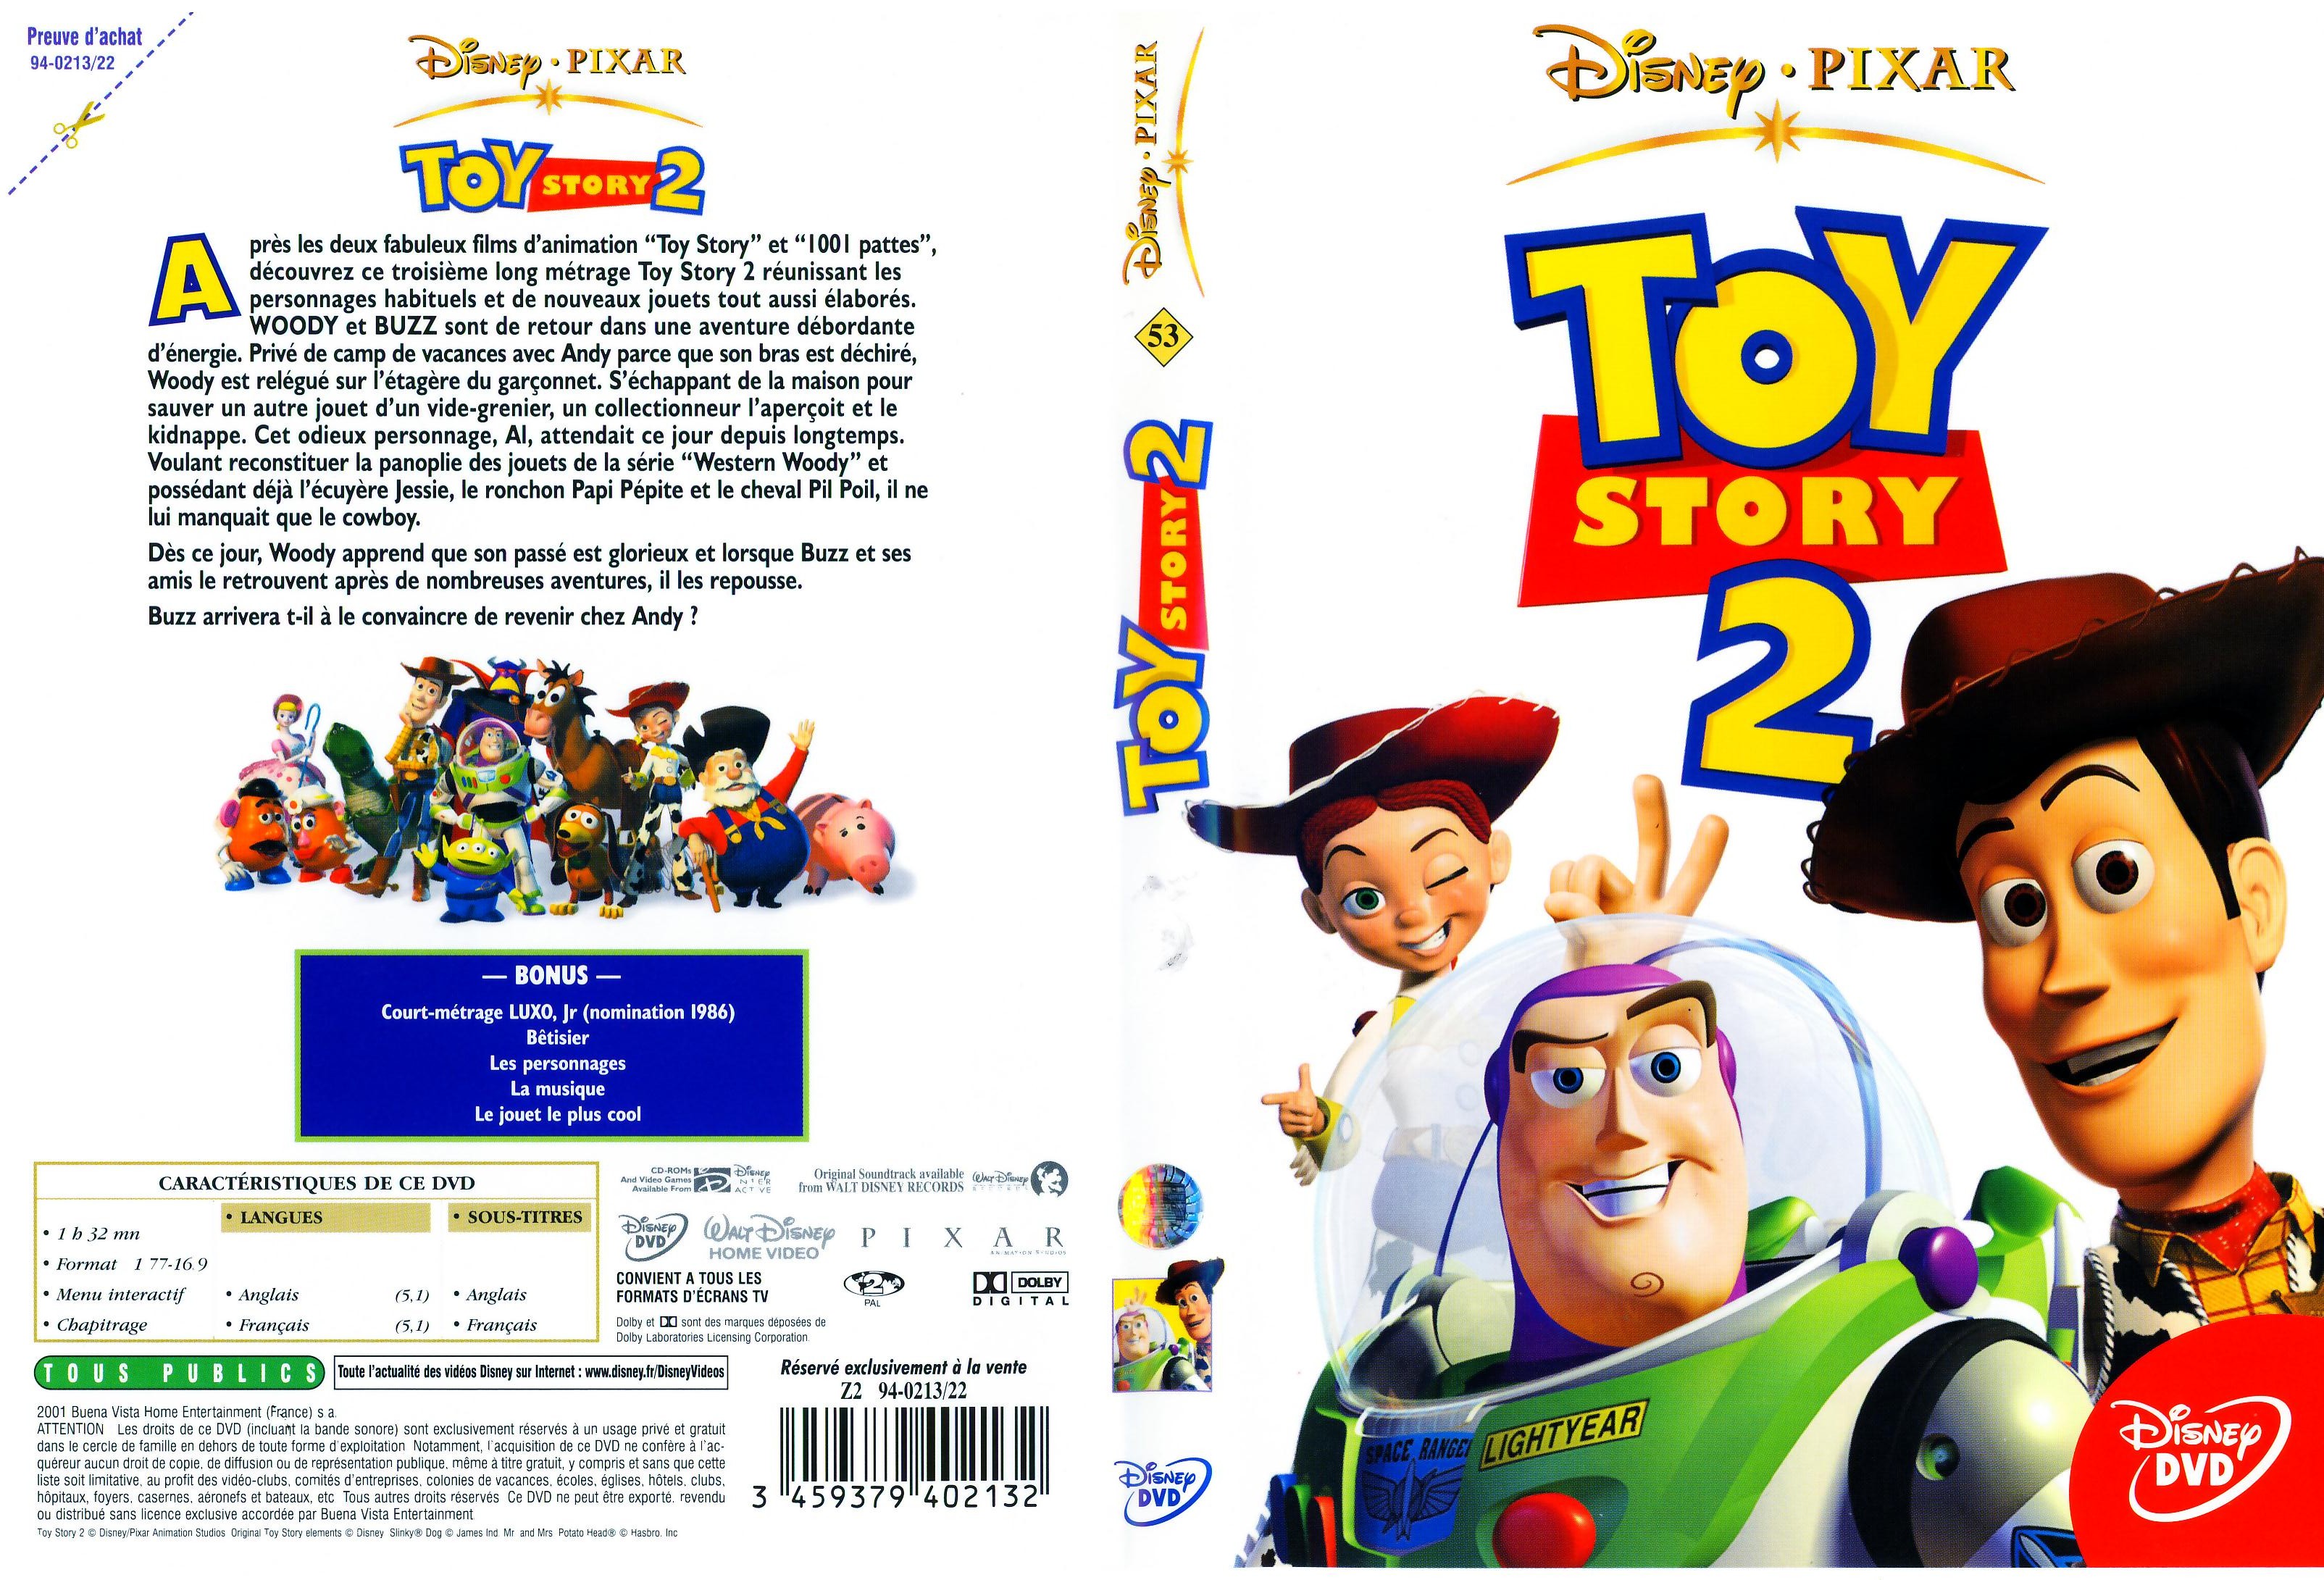 Jaquette DVD Toy Story 2 v2